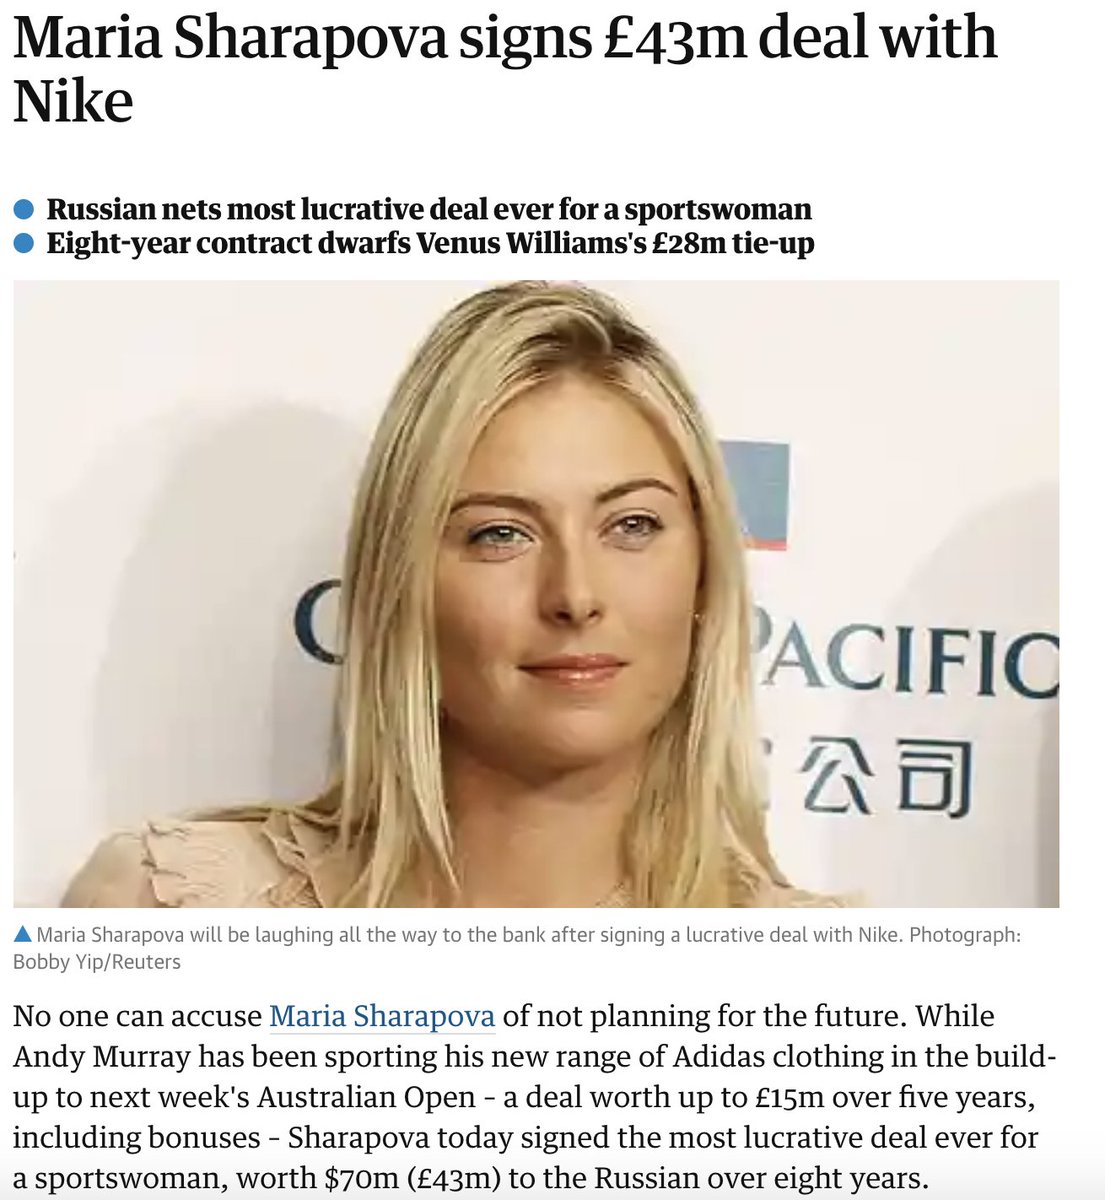 In early 2010, just before the Australian Open, Sharapova renewed her deal with Nike for an unprecedented $70 million, the largest deal ever for a female athlete, despite not winning a slam in two years. She was knocked out in the 1st round by another Russian Maria: Kirilenko.